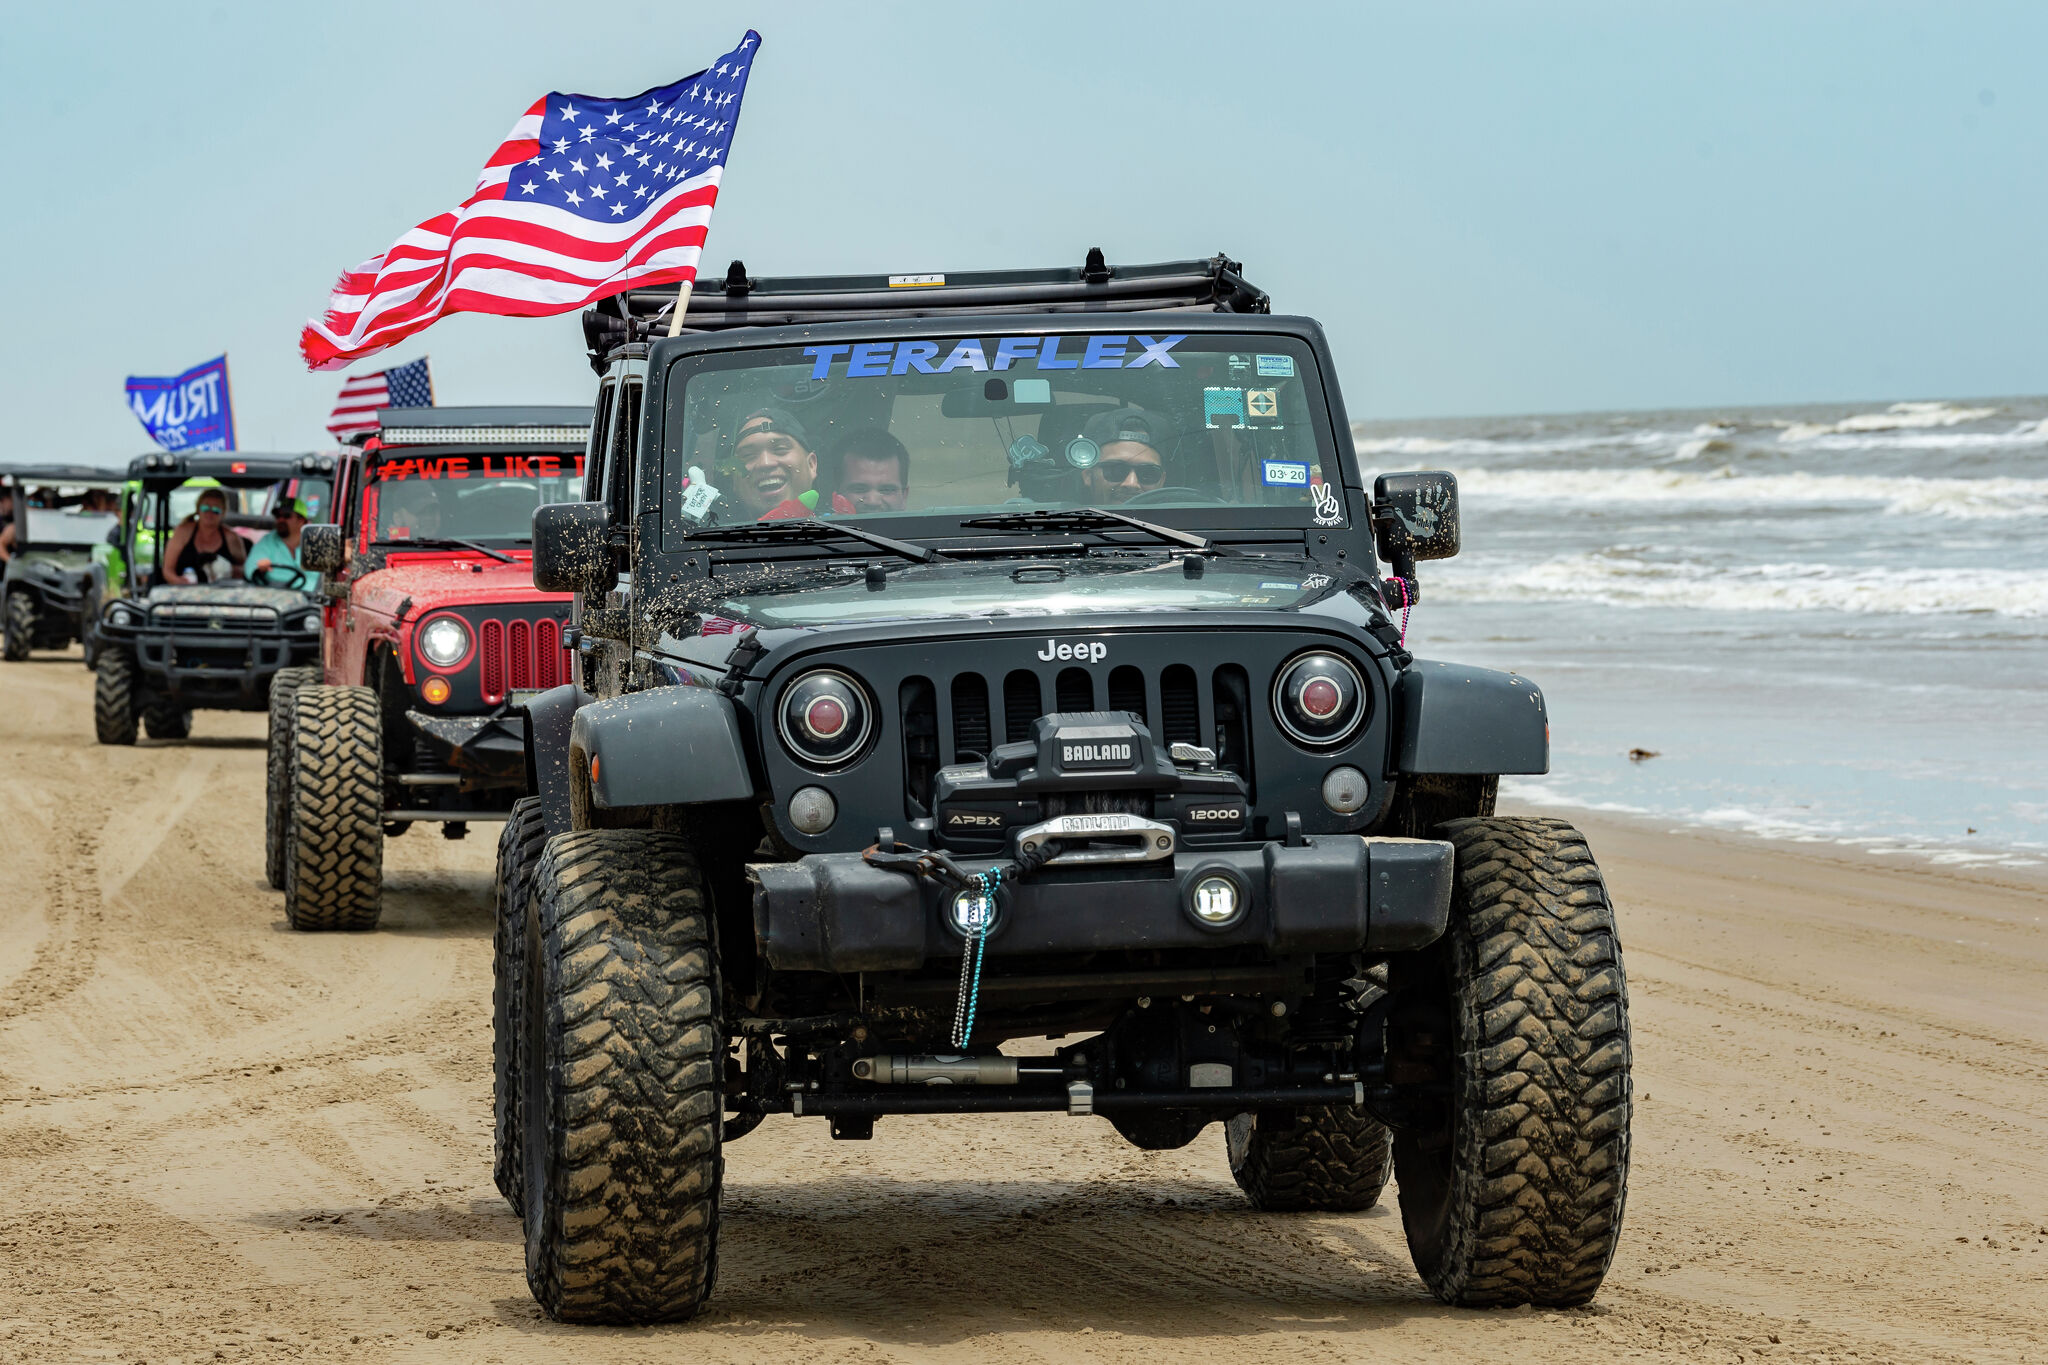 233 arrested in Galveston during 'Go Topless' Jeep weekend